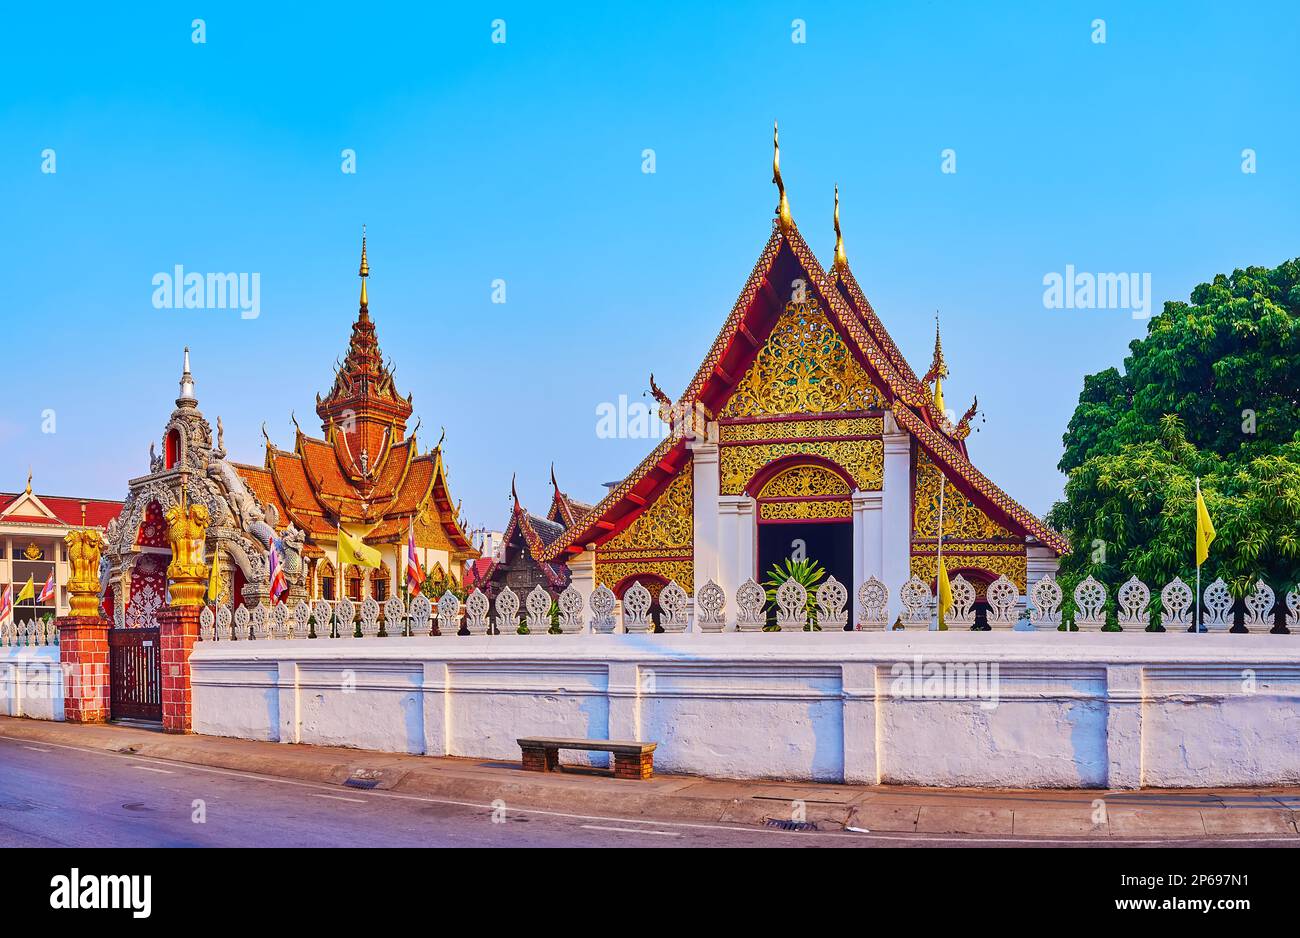 The beautiful gable ends and multi-tired roofs of the shrines of Wat Buppharam behind the white sculptured fence, Chiang Mai, Thailand Stock Photo